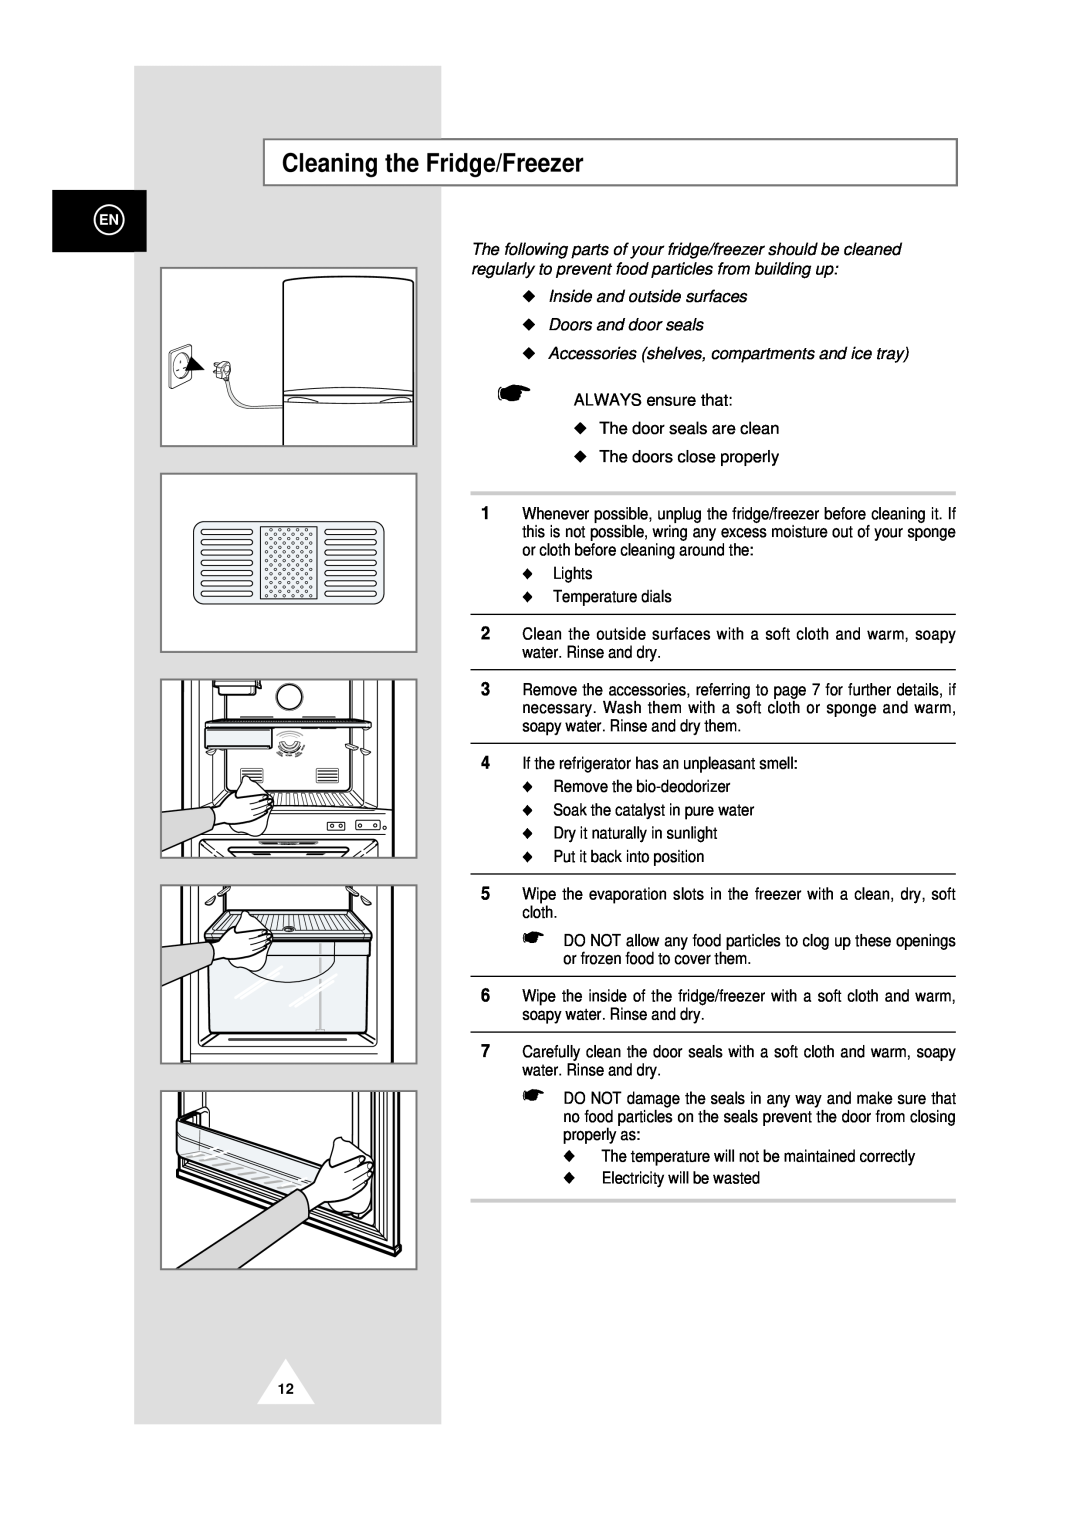 Samsung DA99-00478C instruction manual Cleaning the Fridge/Freezer, Inside and outside surfaces Doors and door seals 